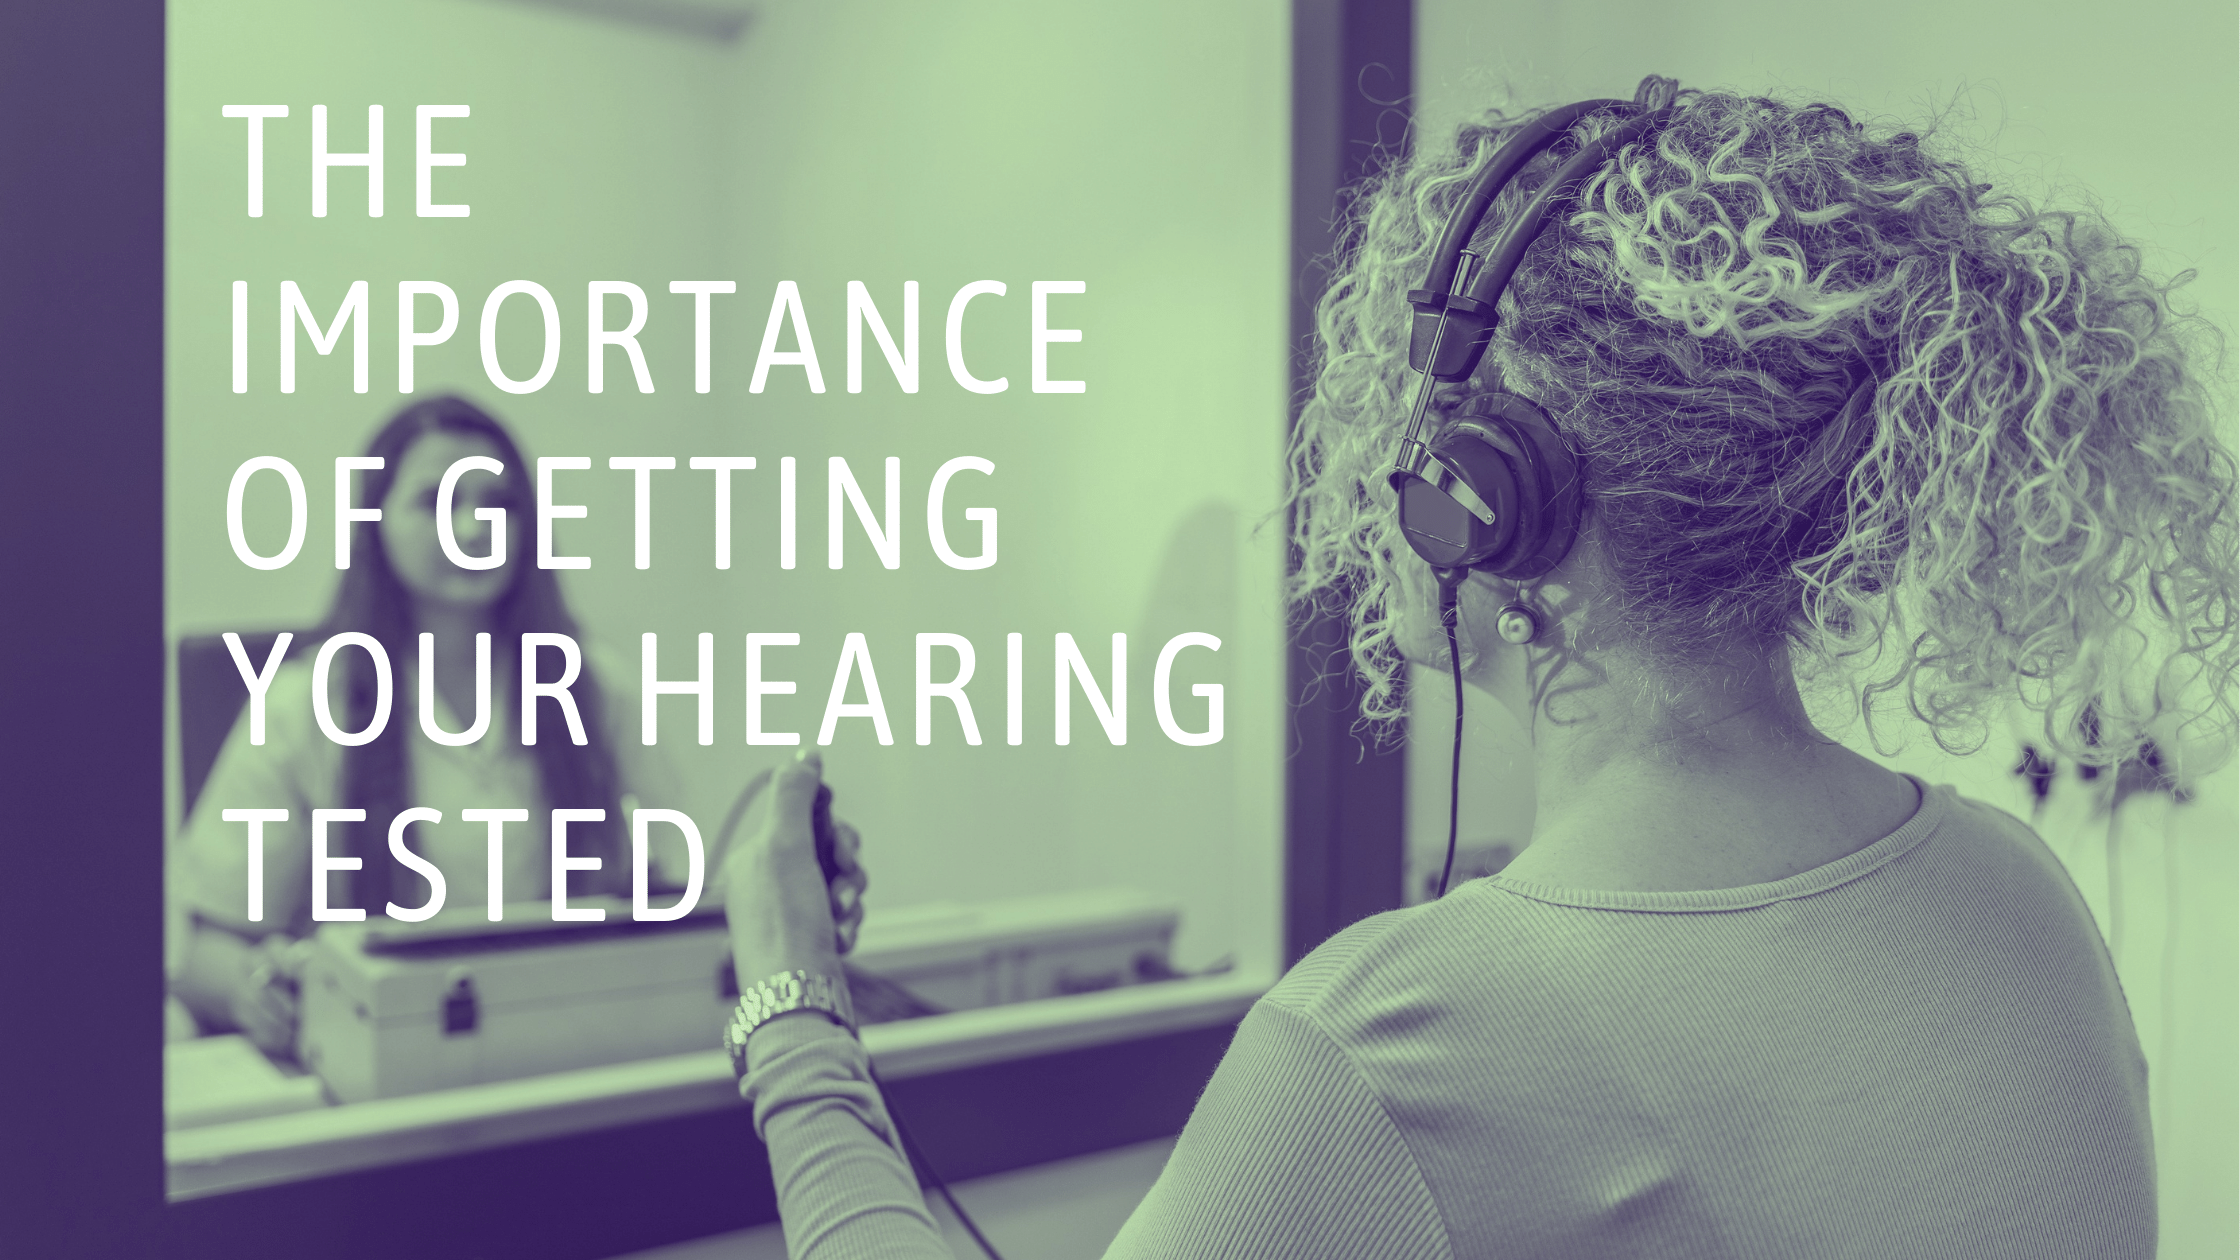 Featured image for “The Importance of Getting Your Hearing Tested”